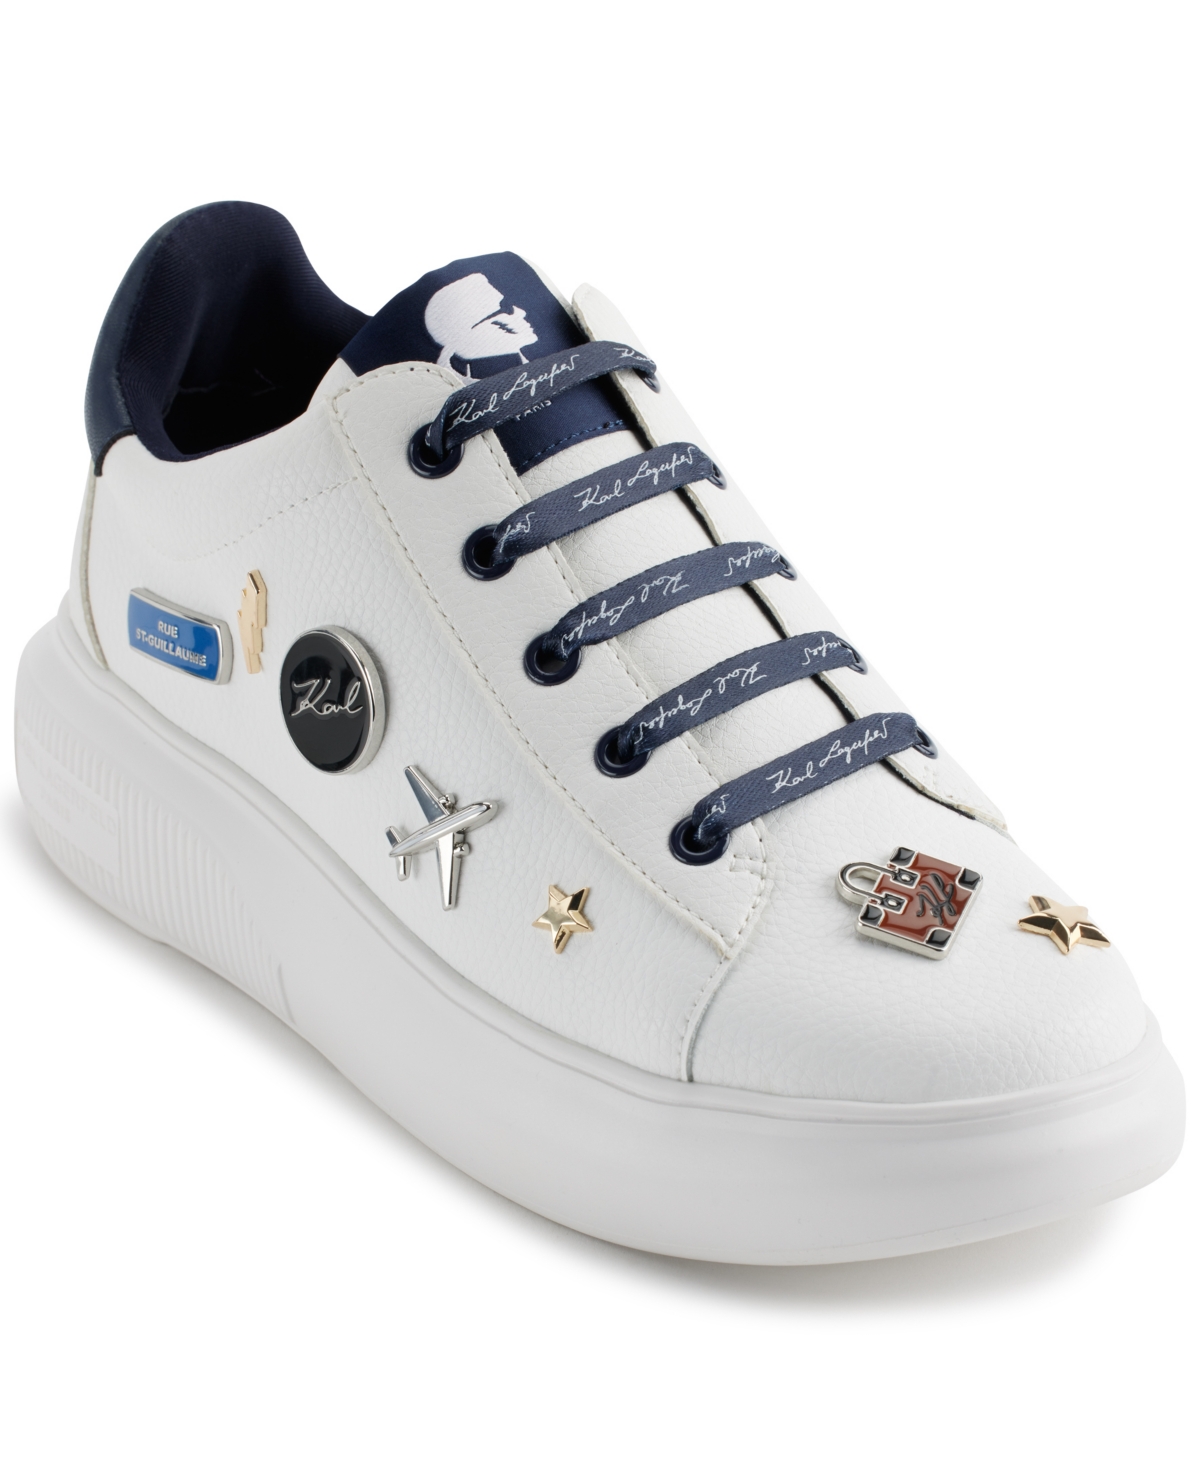 Karl Lagerfeld Justina Lace Up Platform Sneakers In Bright White,navy